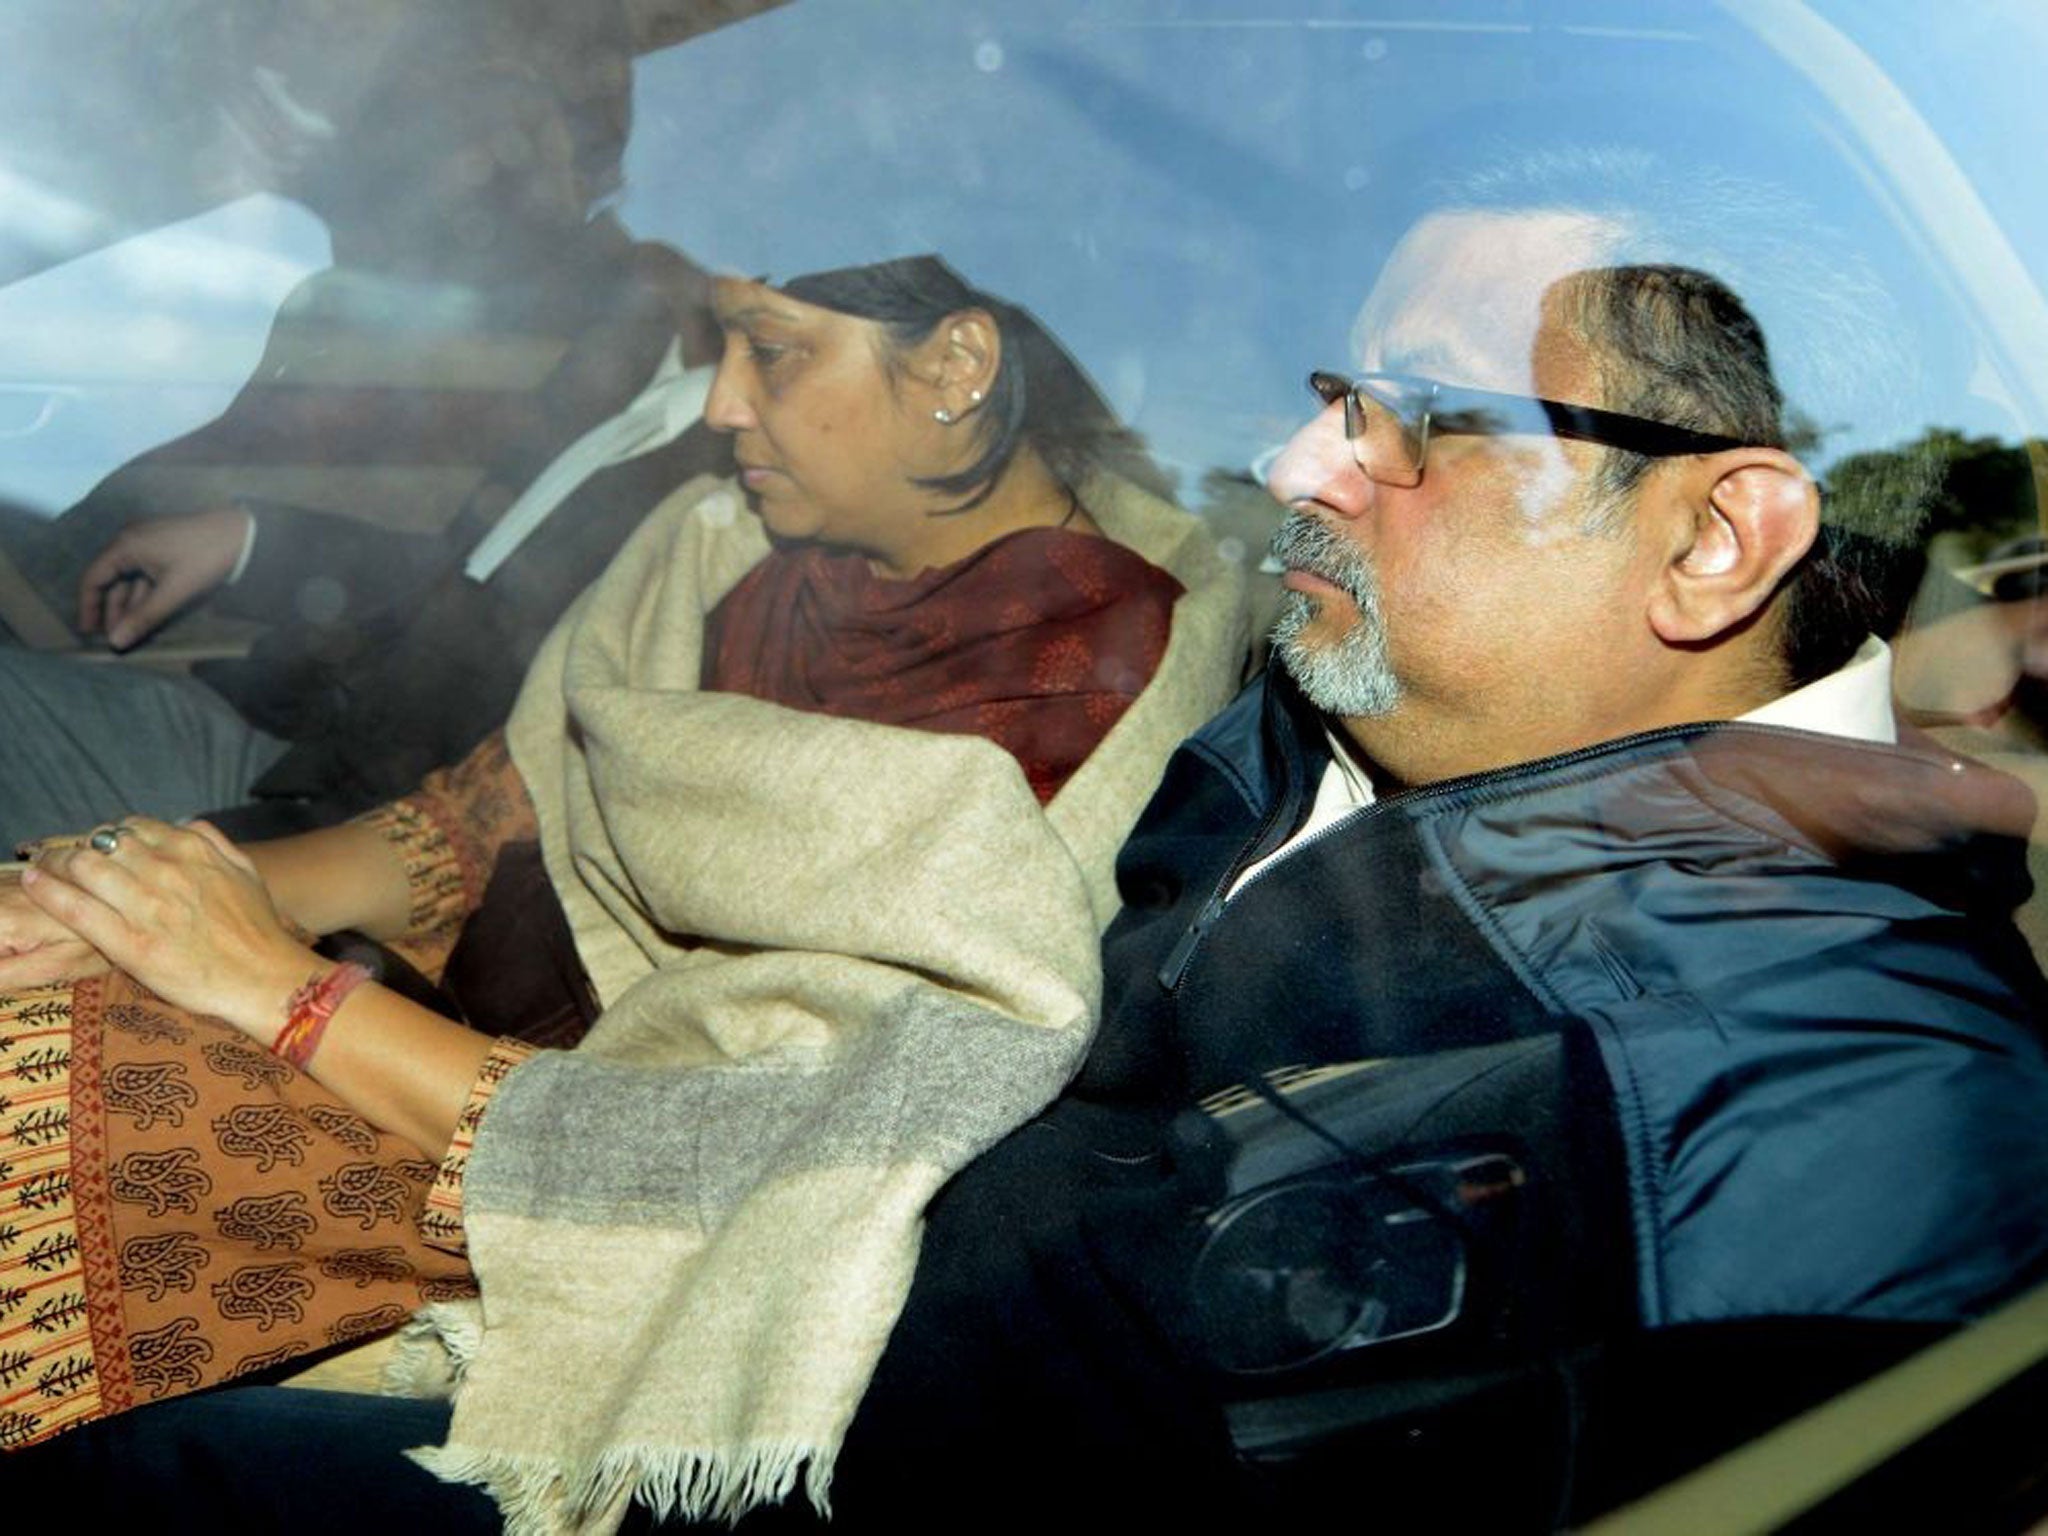 Rajesh Talwar, right, and his wife Nupur, centre, are driven away by Indian police outside a court after their trial for double murder in Ghaziabad, India